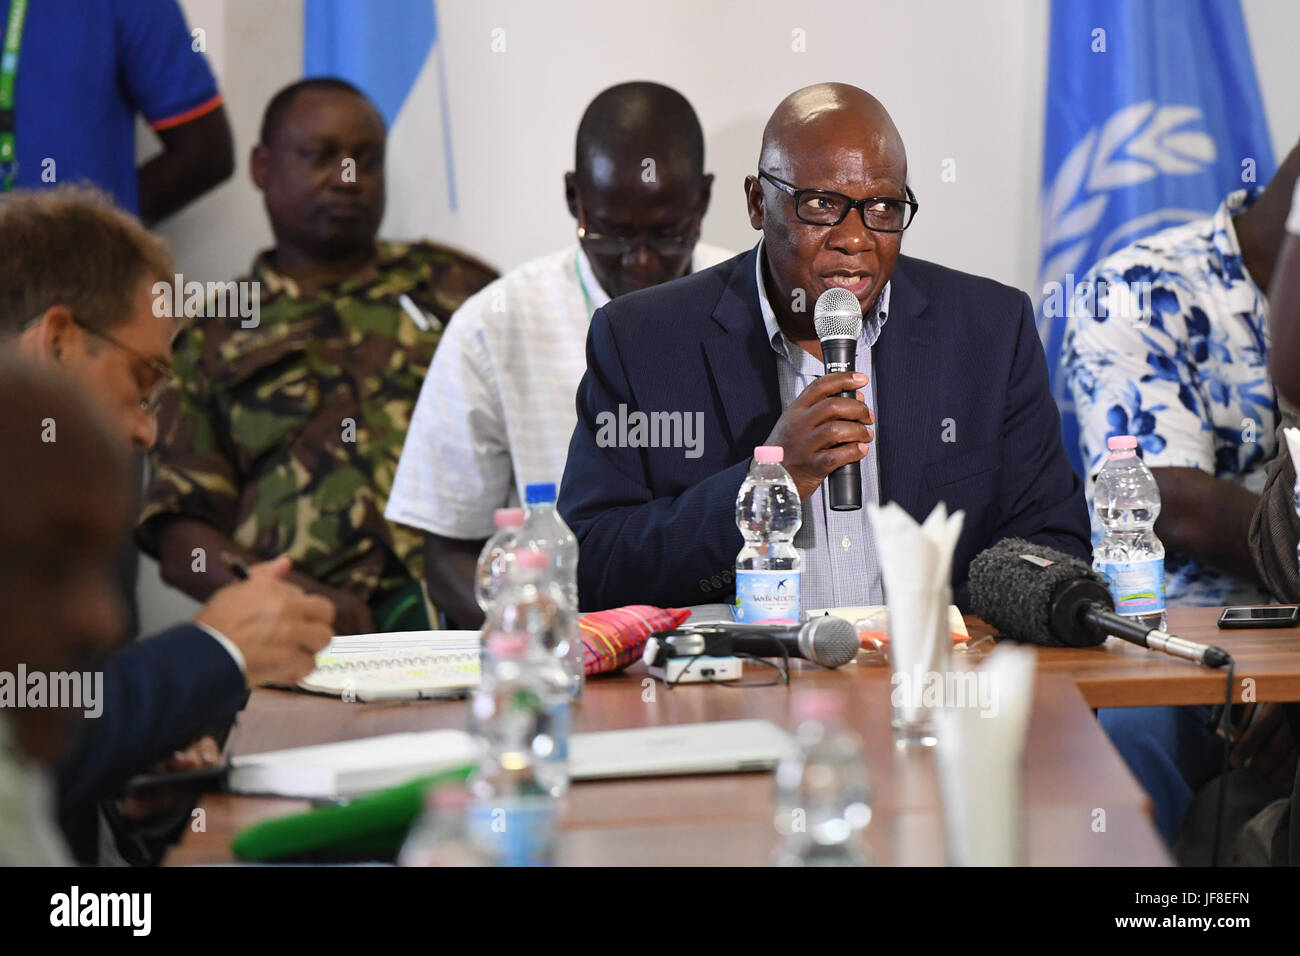 Raisedon Zenenga, the Deputy Special Representative of the UN Secretary-General (DSRSG) for Somalia, speaks during a meeting of the African Union-United Nations, Federal Government of Somalia joint assessment mission in Mogadishu, Somalia on May 21, 2017. AMISOM Photo / Omar Abdisalan Stock Photo